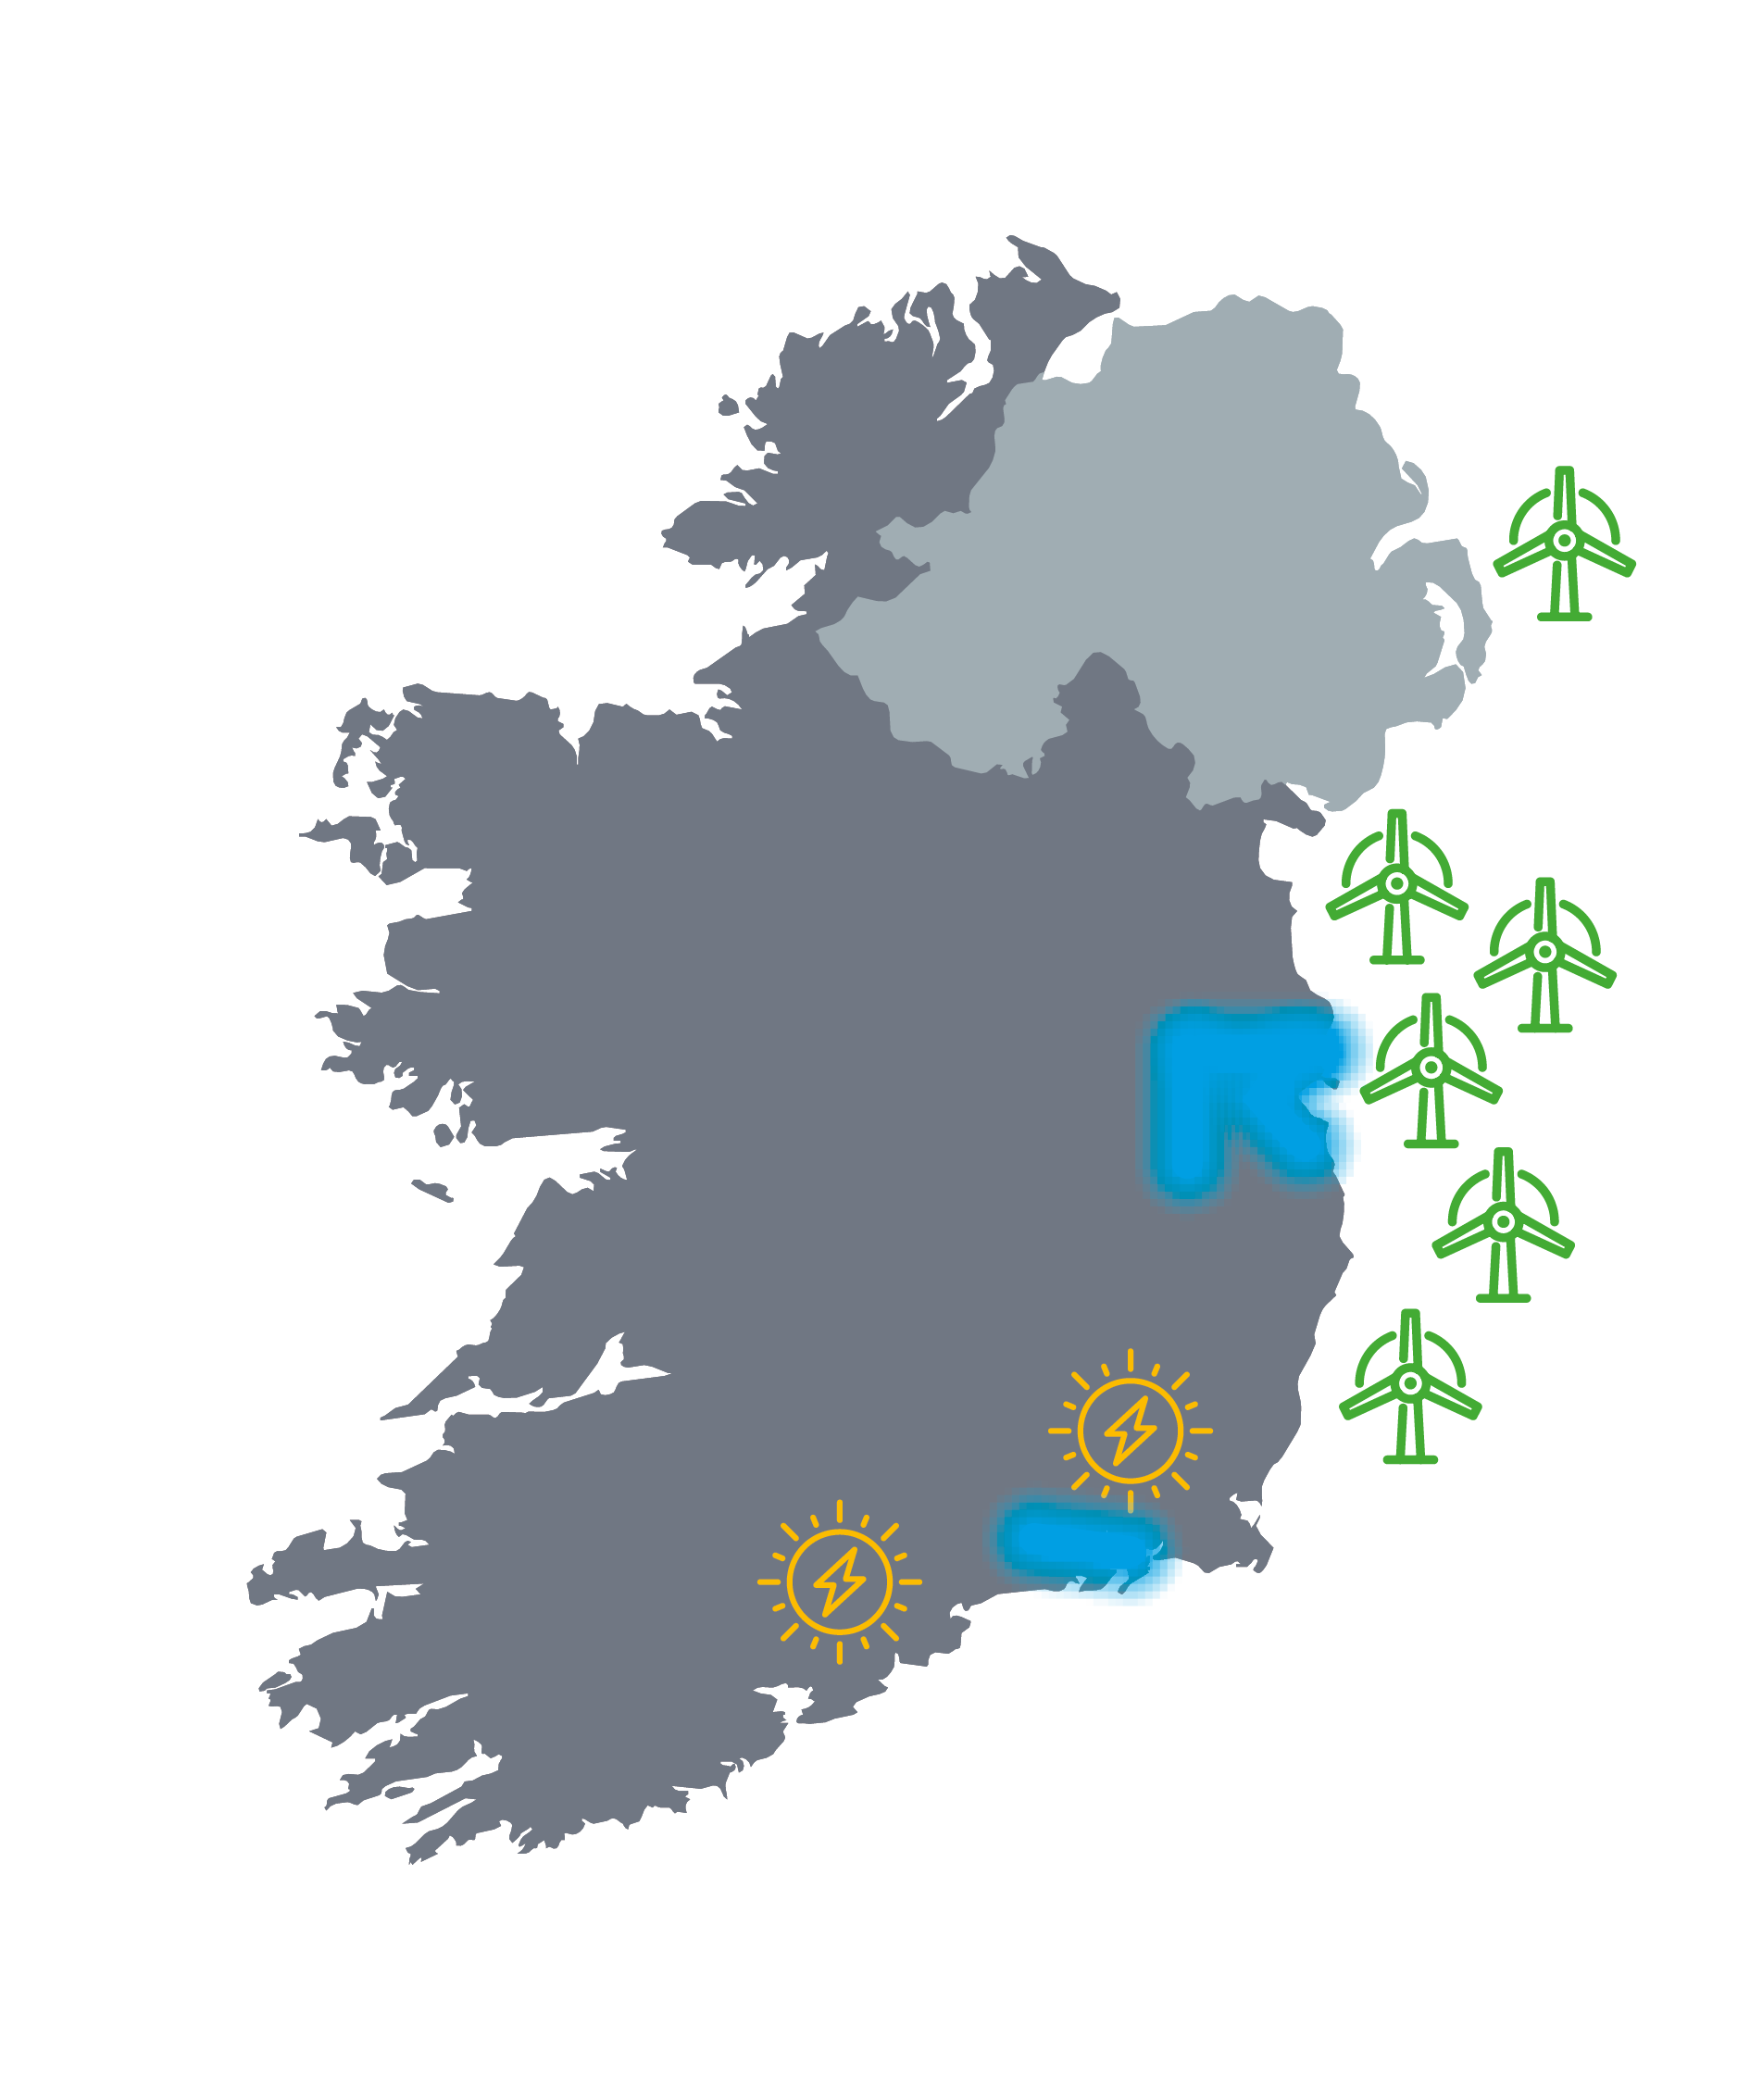 Map of Ireland - Approach 1 diagrammed